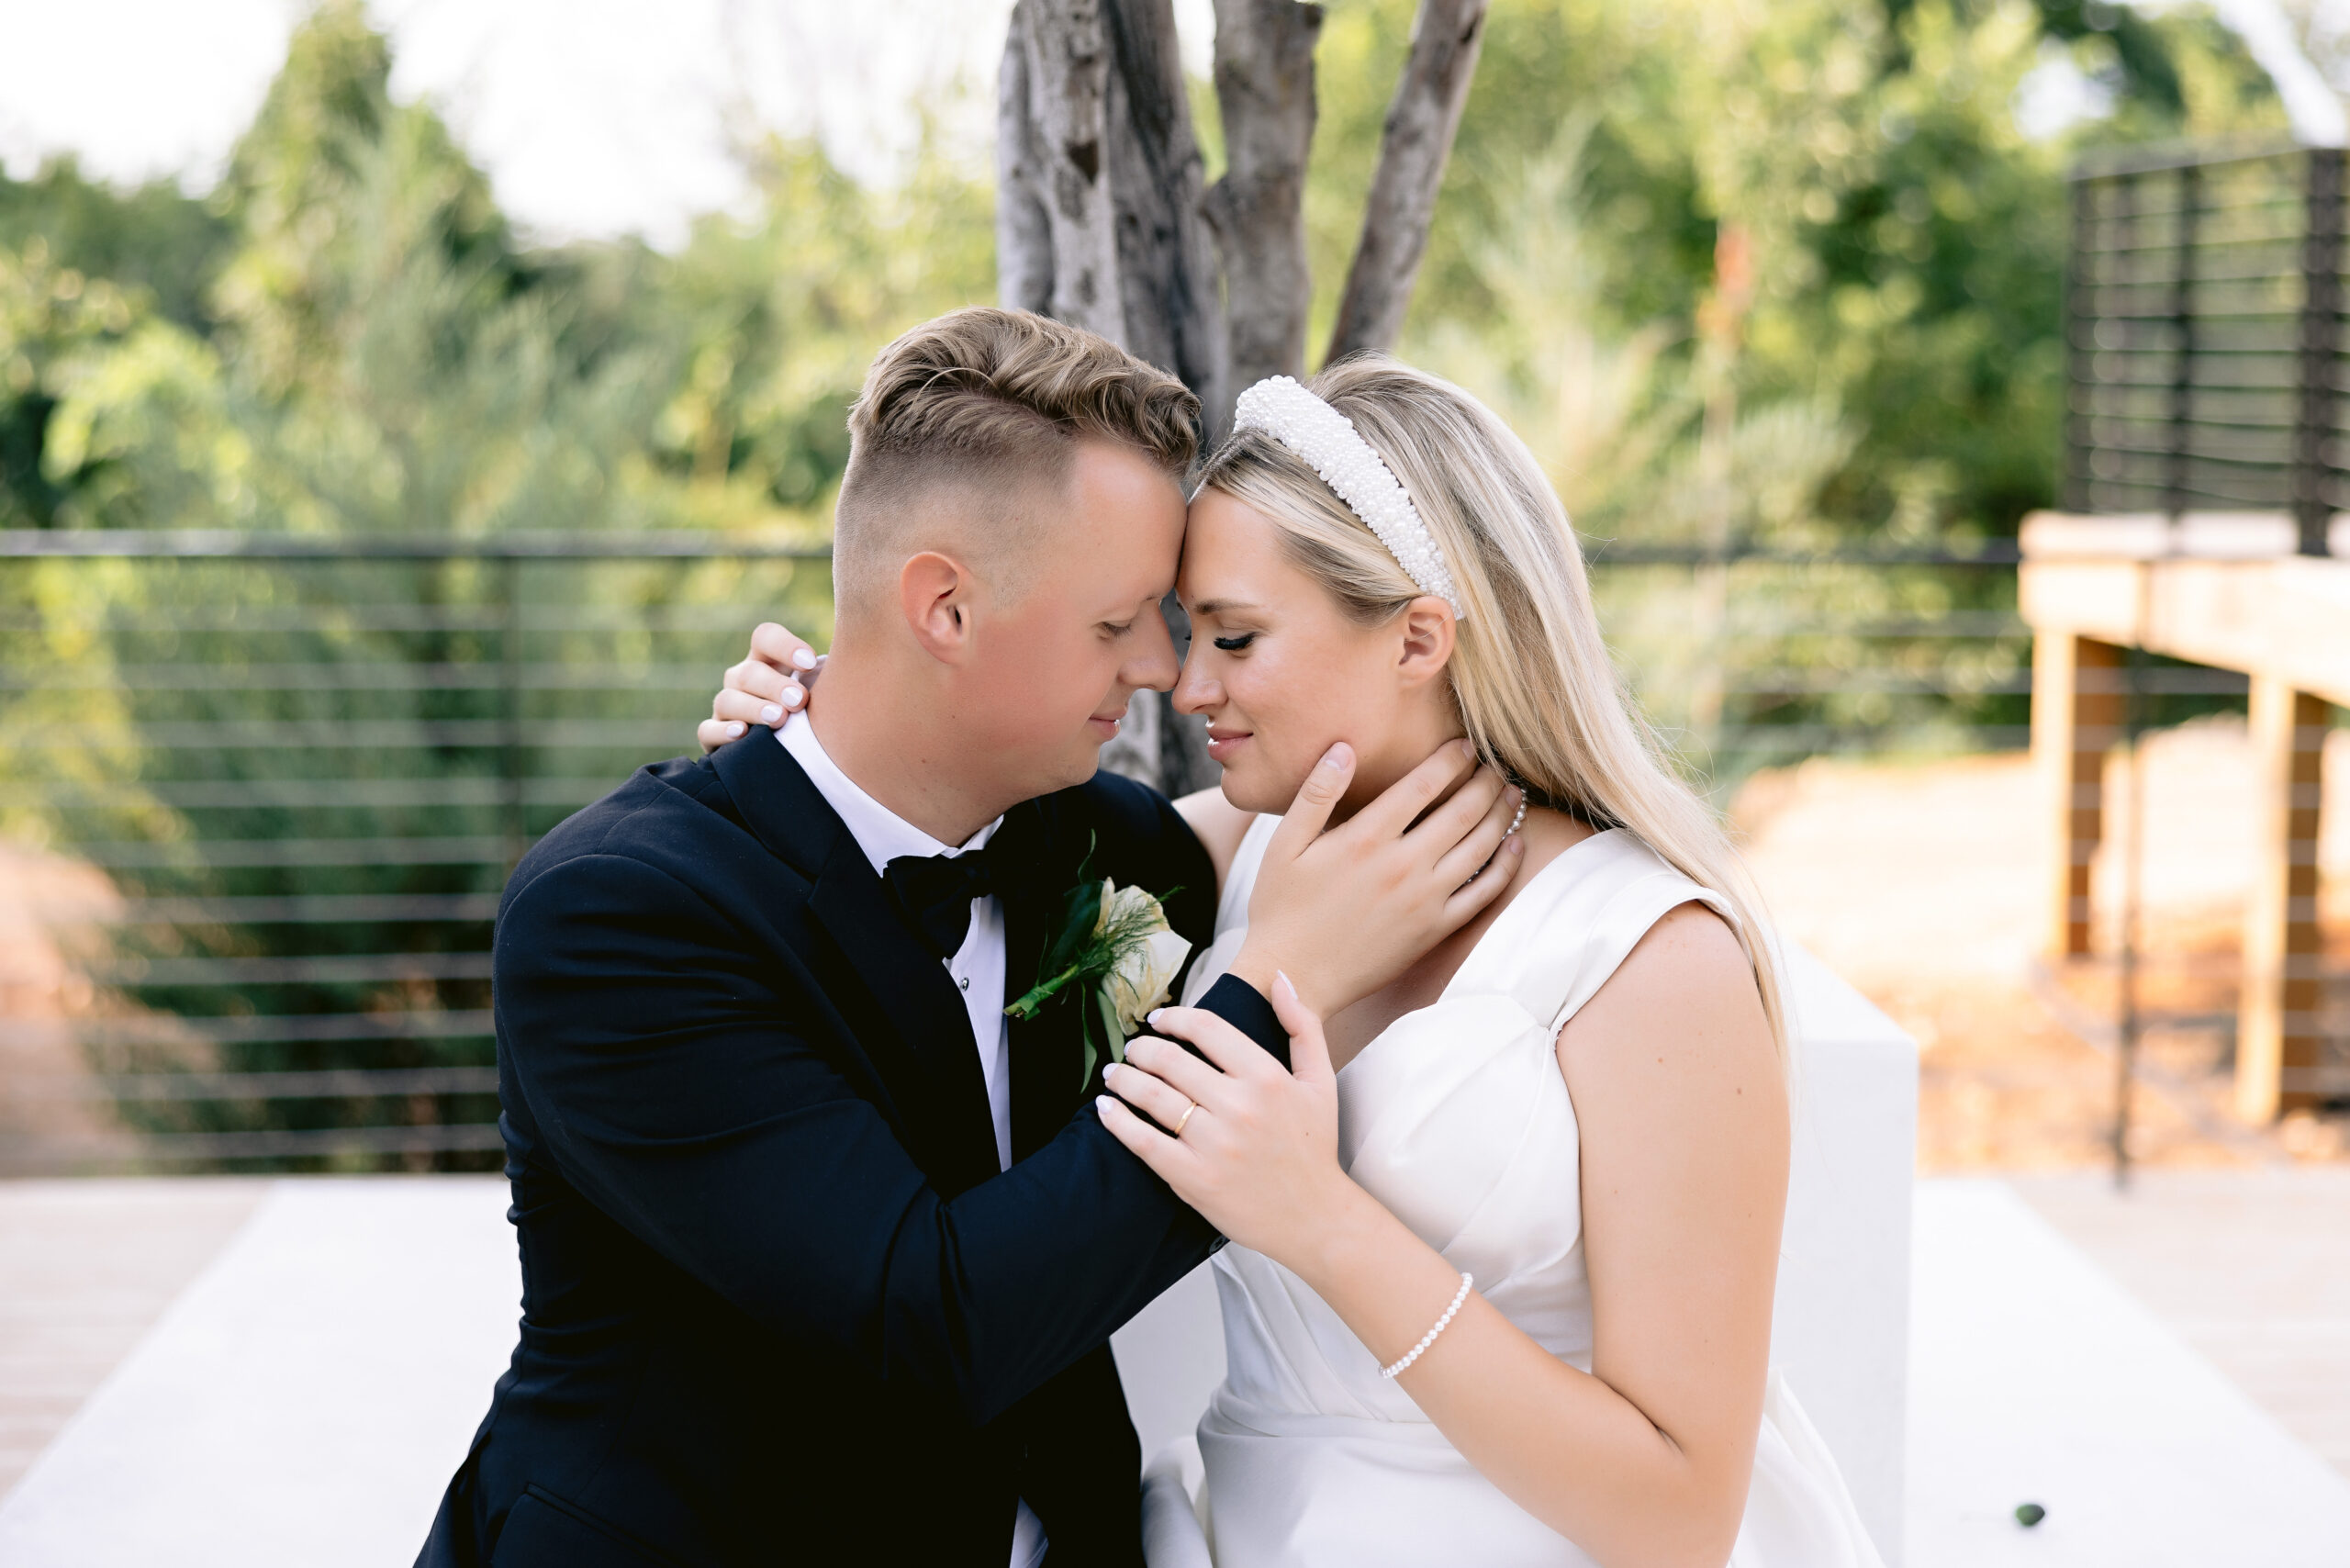 bride and groom forehead to forehead intimate closeup portrait photographed by Tatyana Zadorin Photography